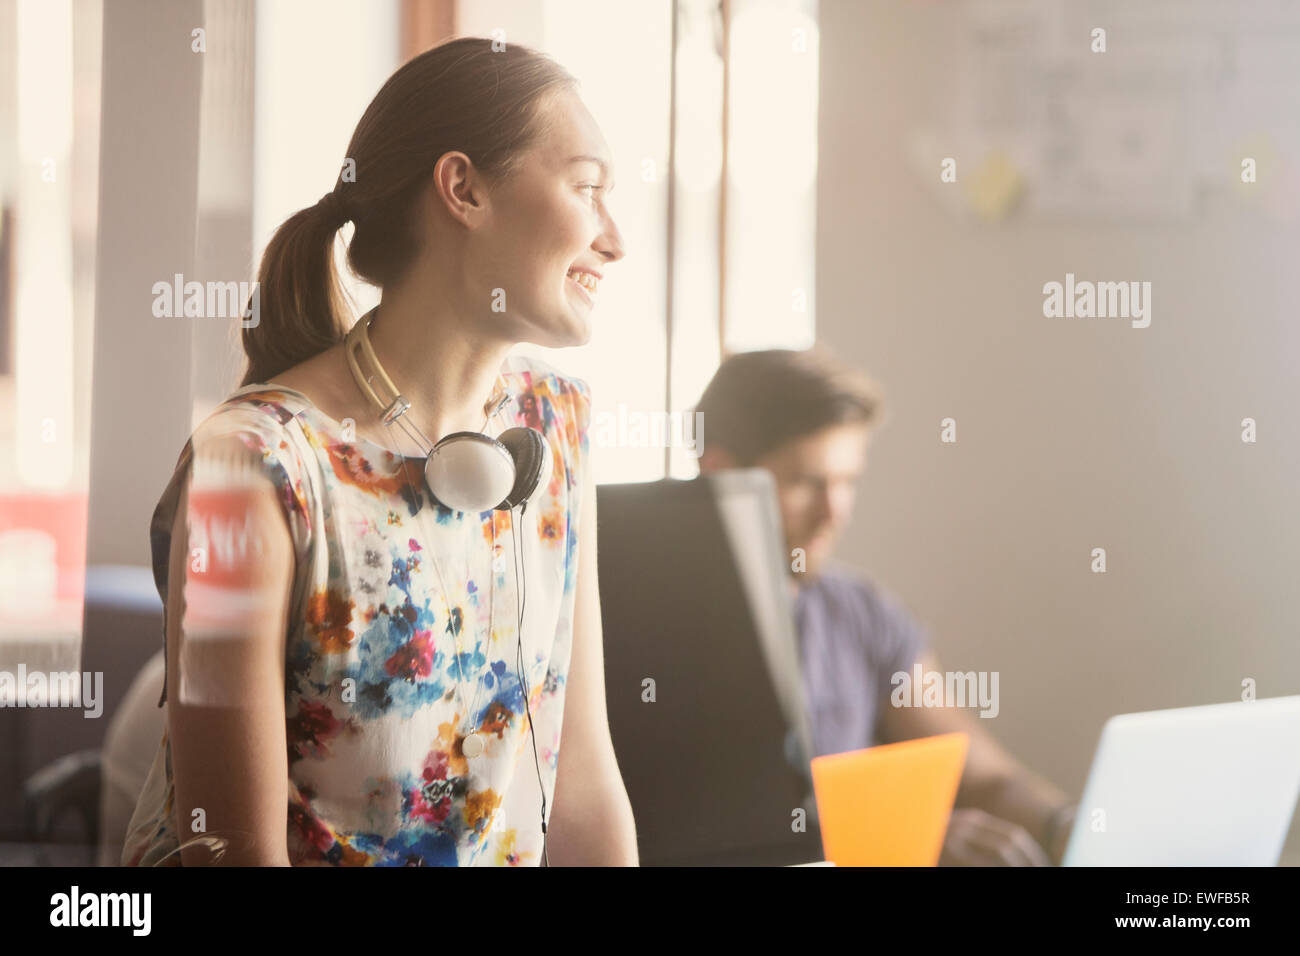 Smiling businesswoman with headphones in office Banque D'Images